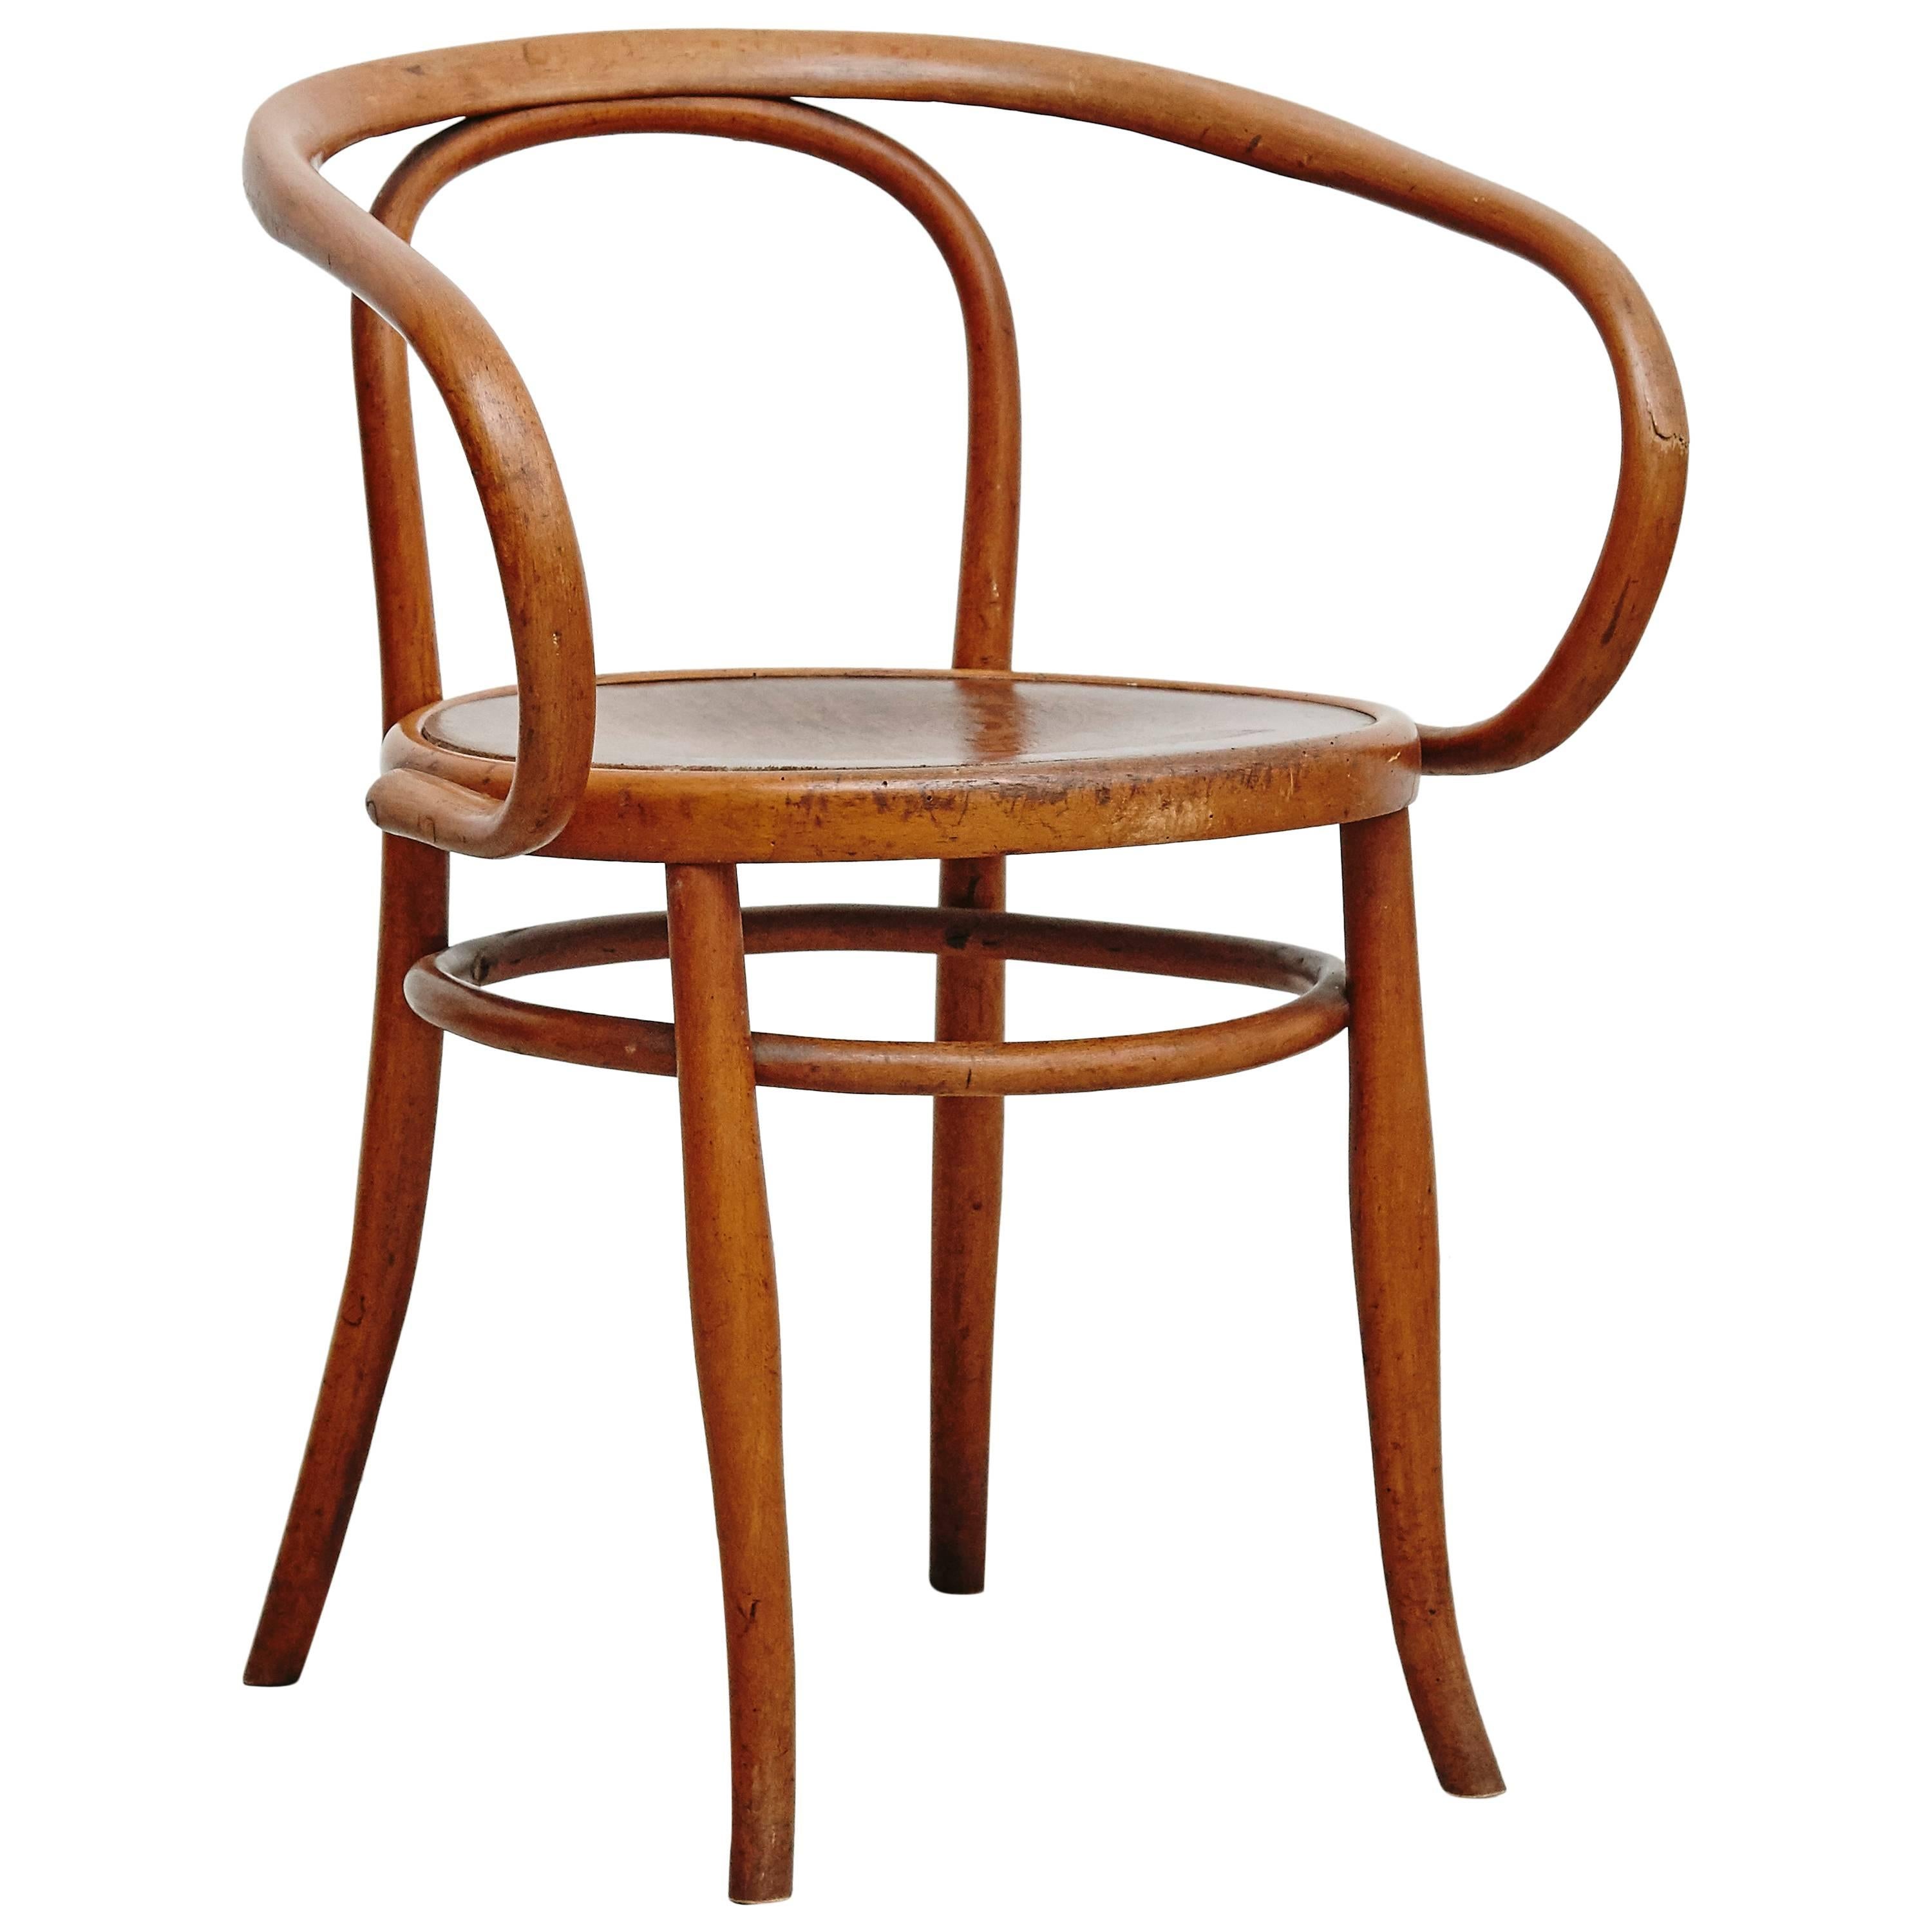 Thonet 209 Armchair by August Thonet for Thonet, circa 1900